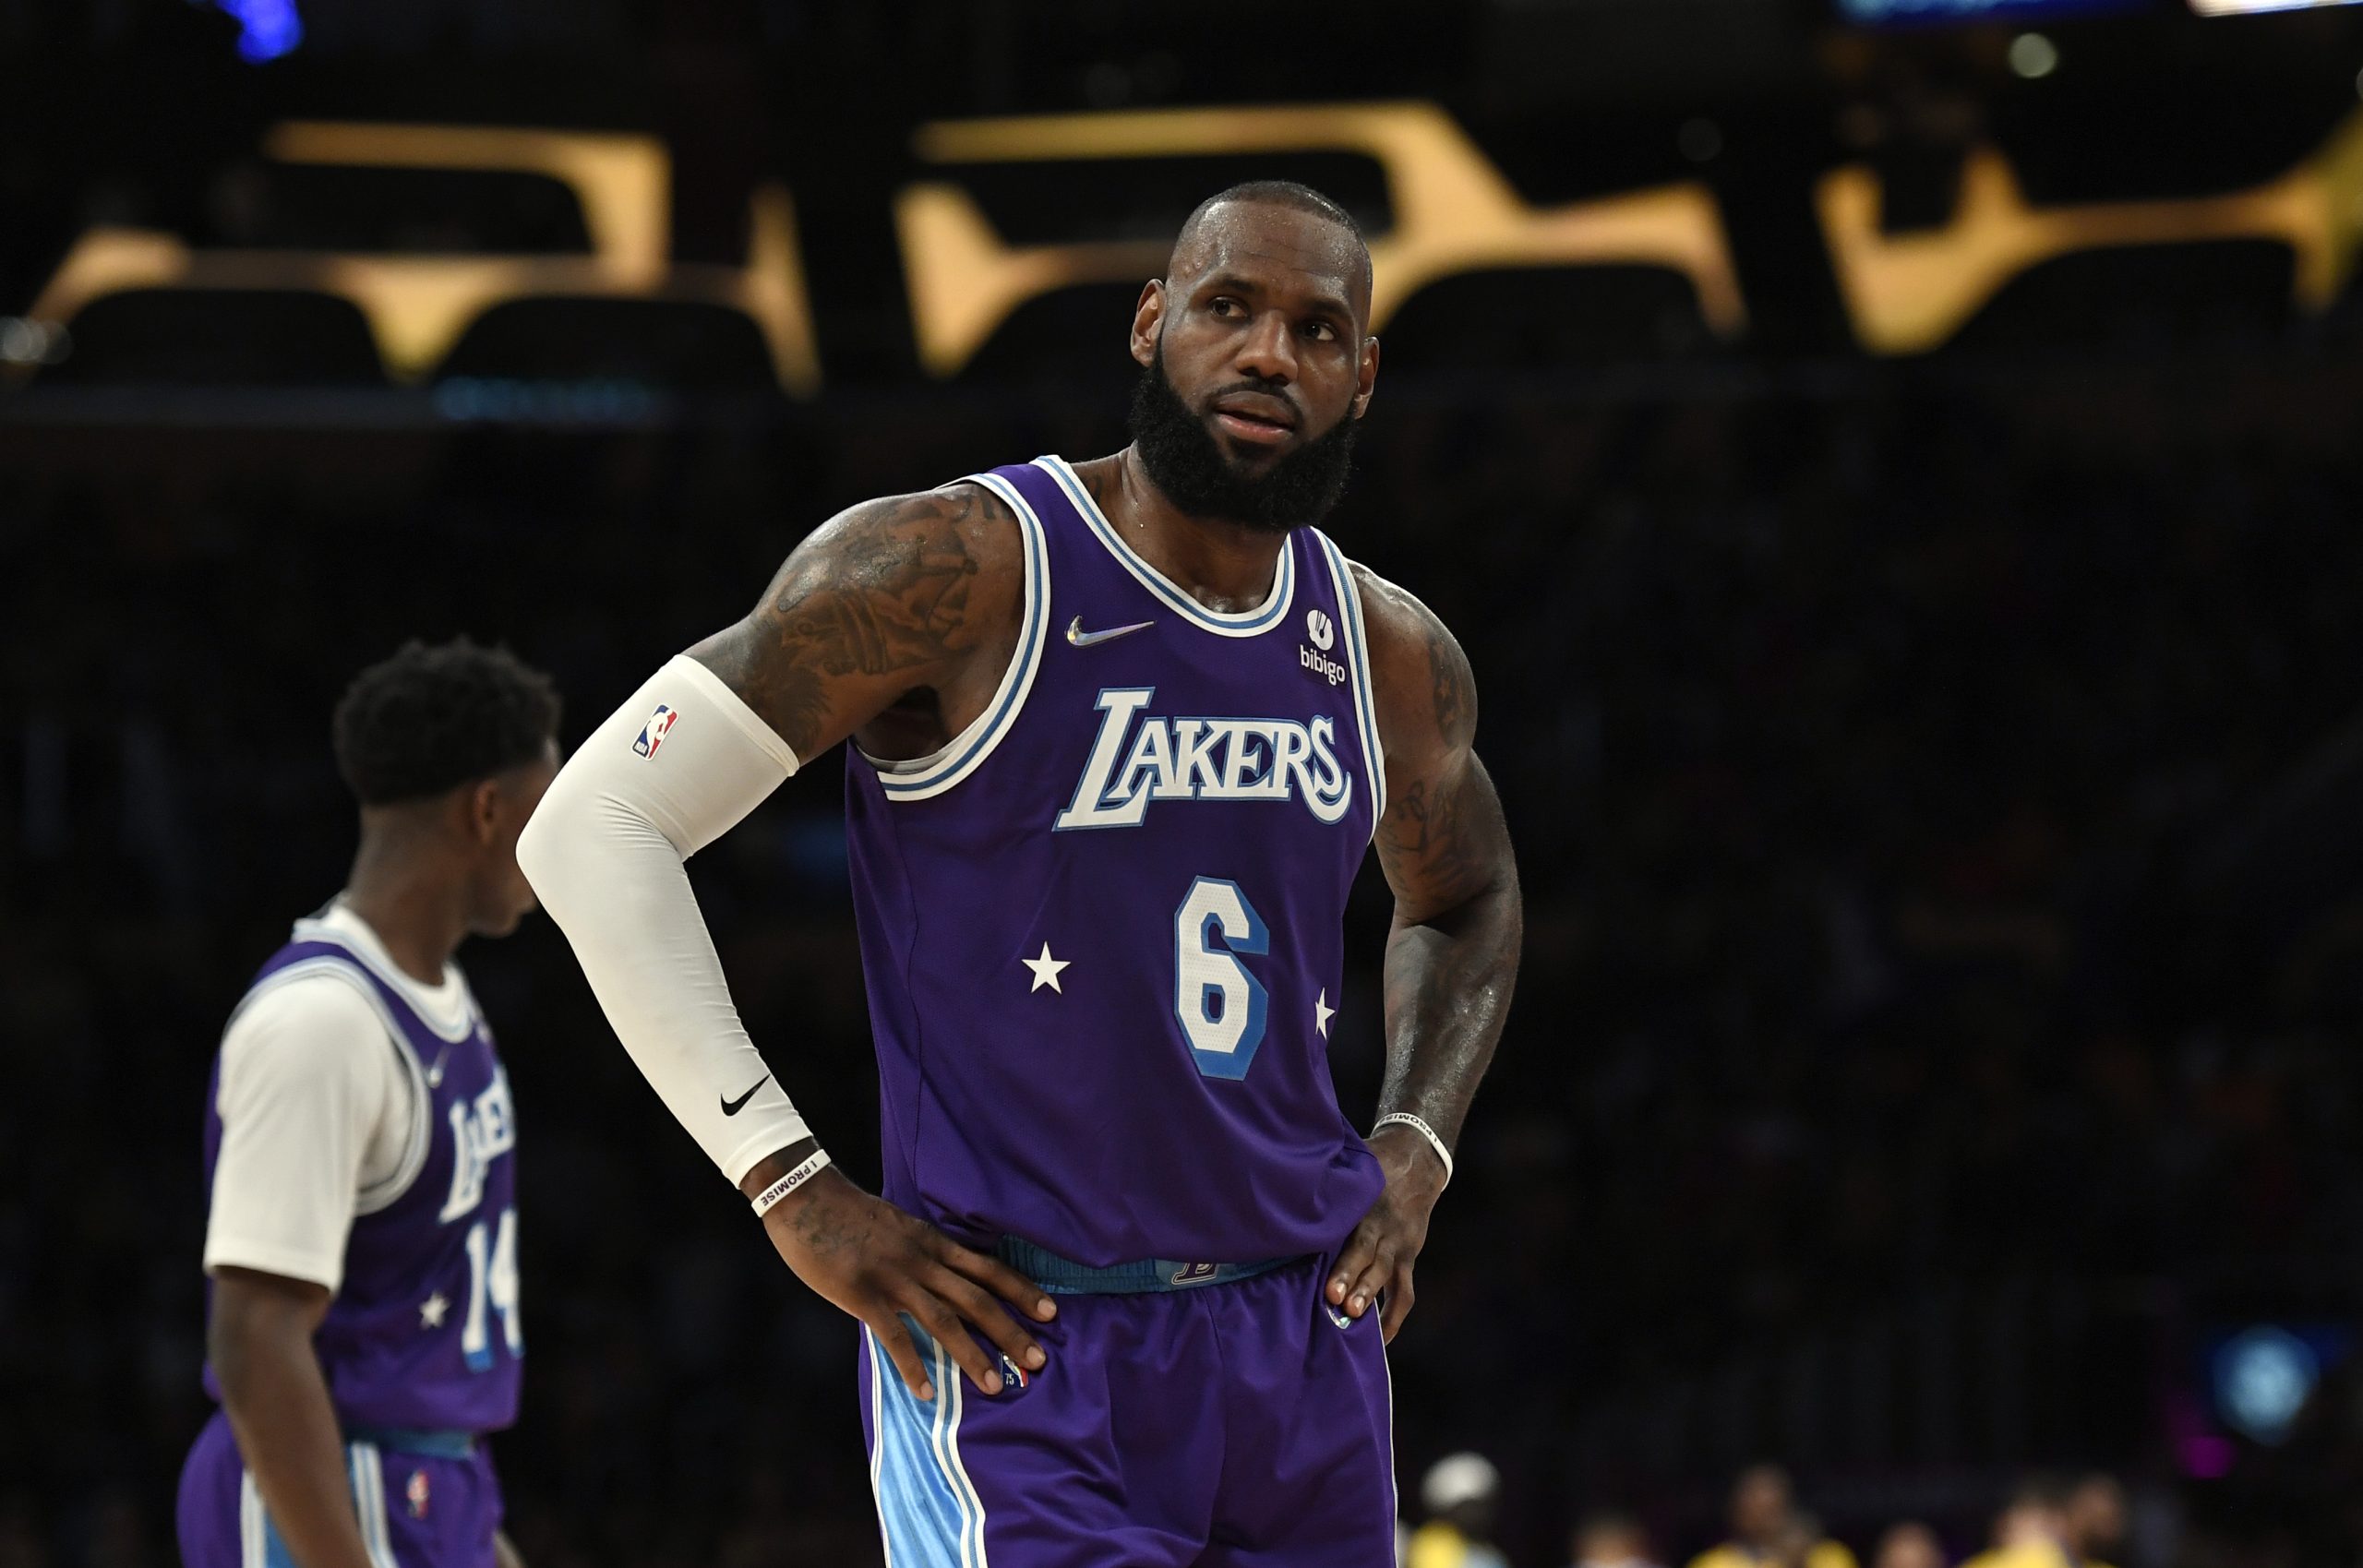 LeBron James and the Lakers Mocked on Social Media After Missing Playoffs